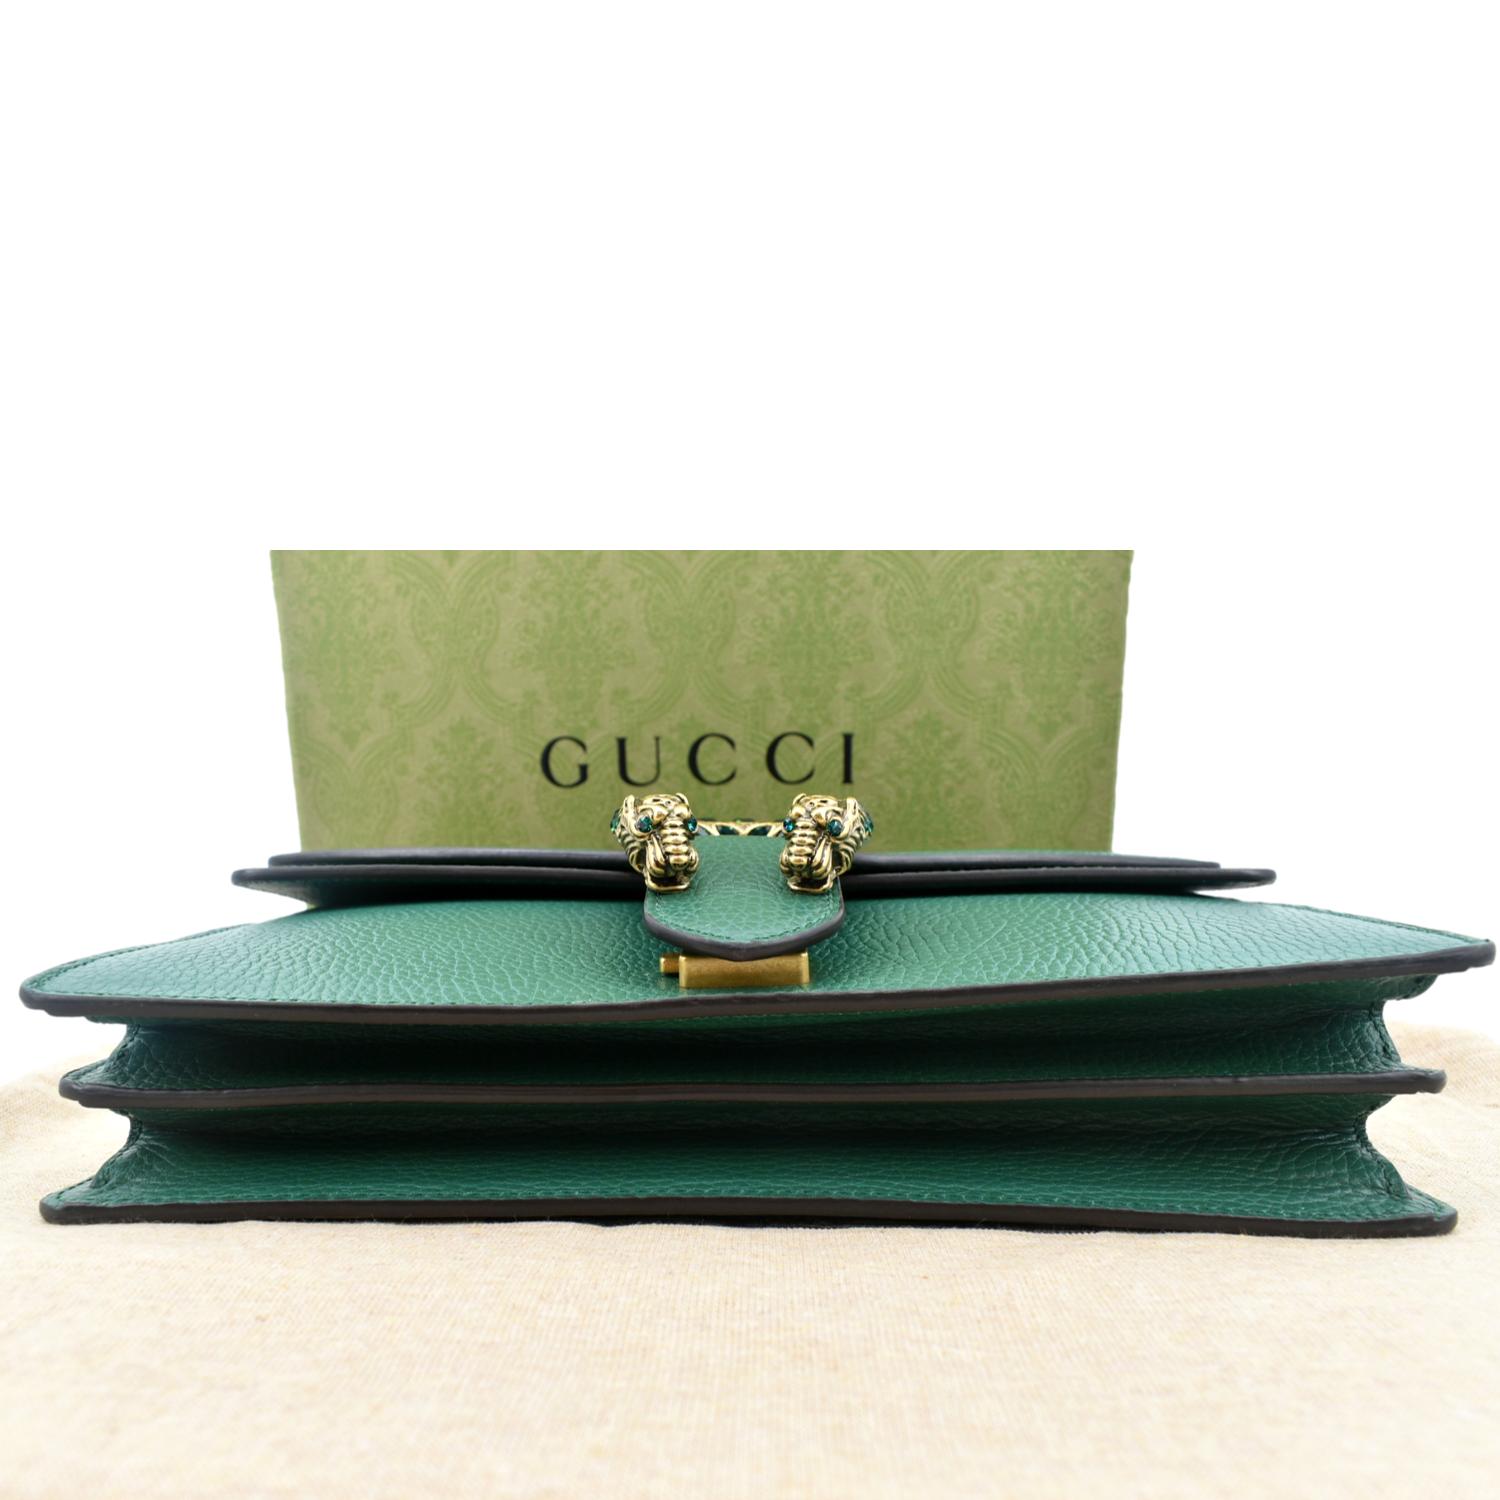 Authentic Gucci Limited Edition Two Tone Green Dionysus Shoulder Bag